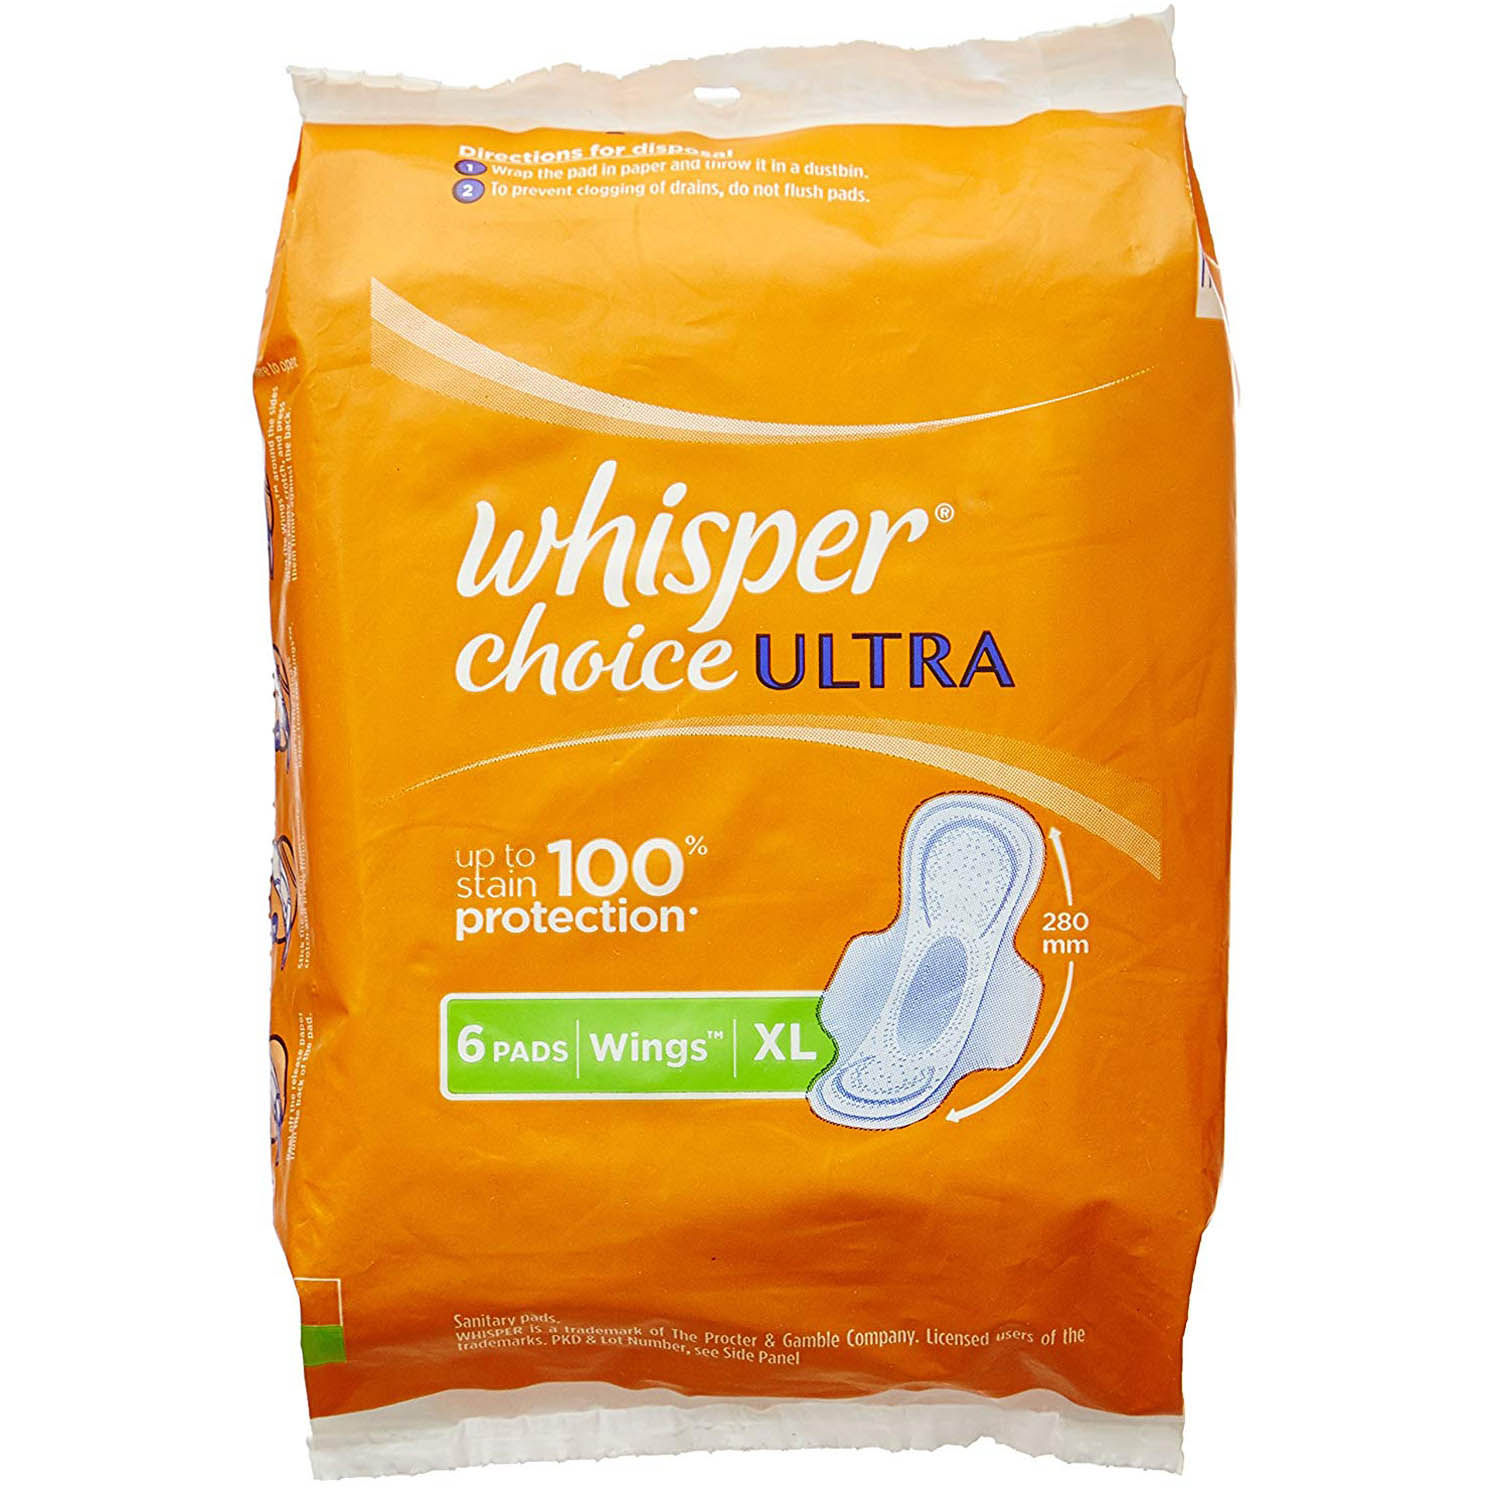 Buy Whisper Choice Ultra Wings Sanitary Pads XL, 6 Count Online